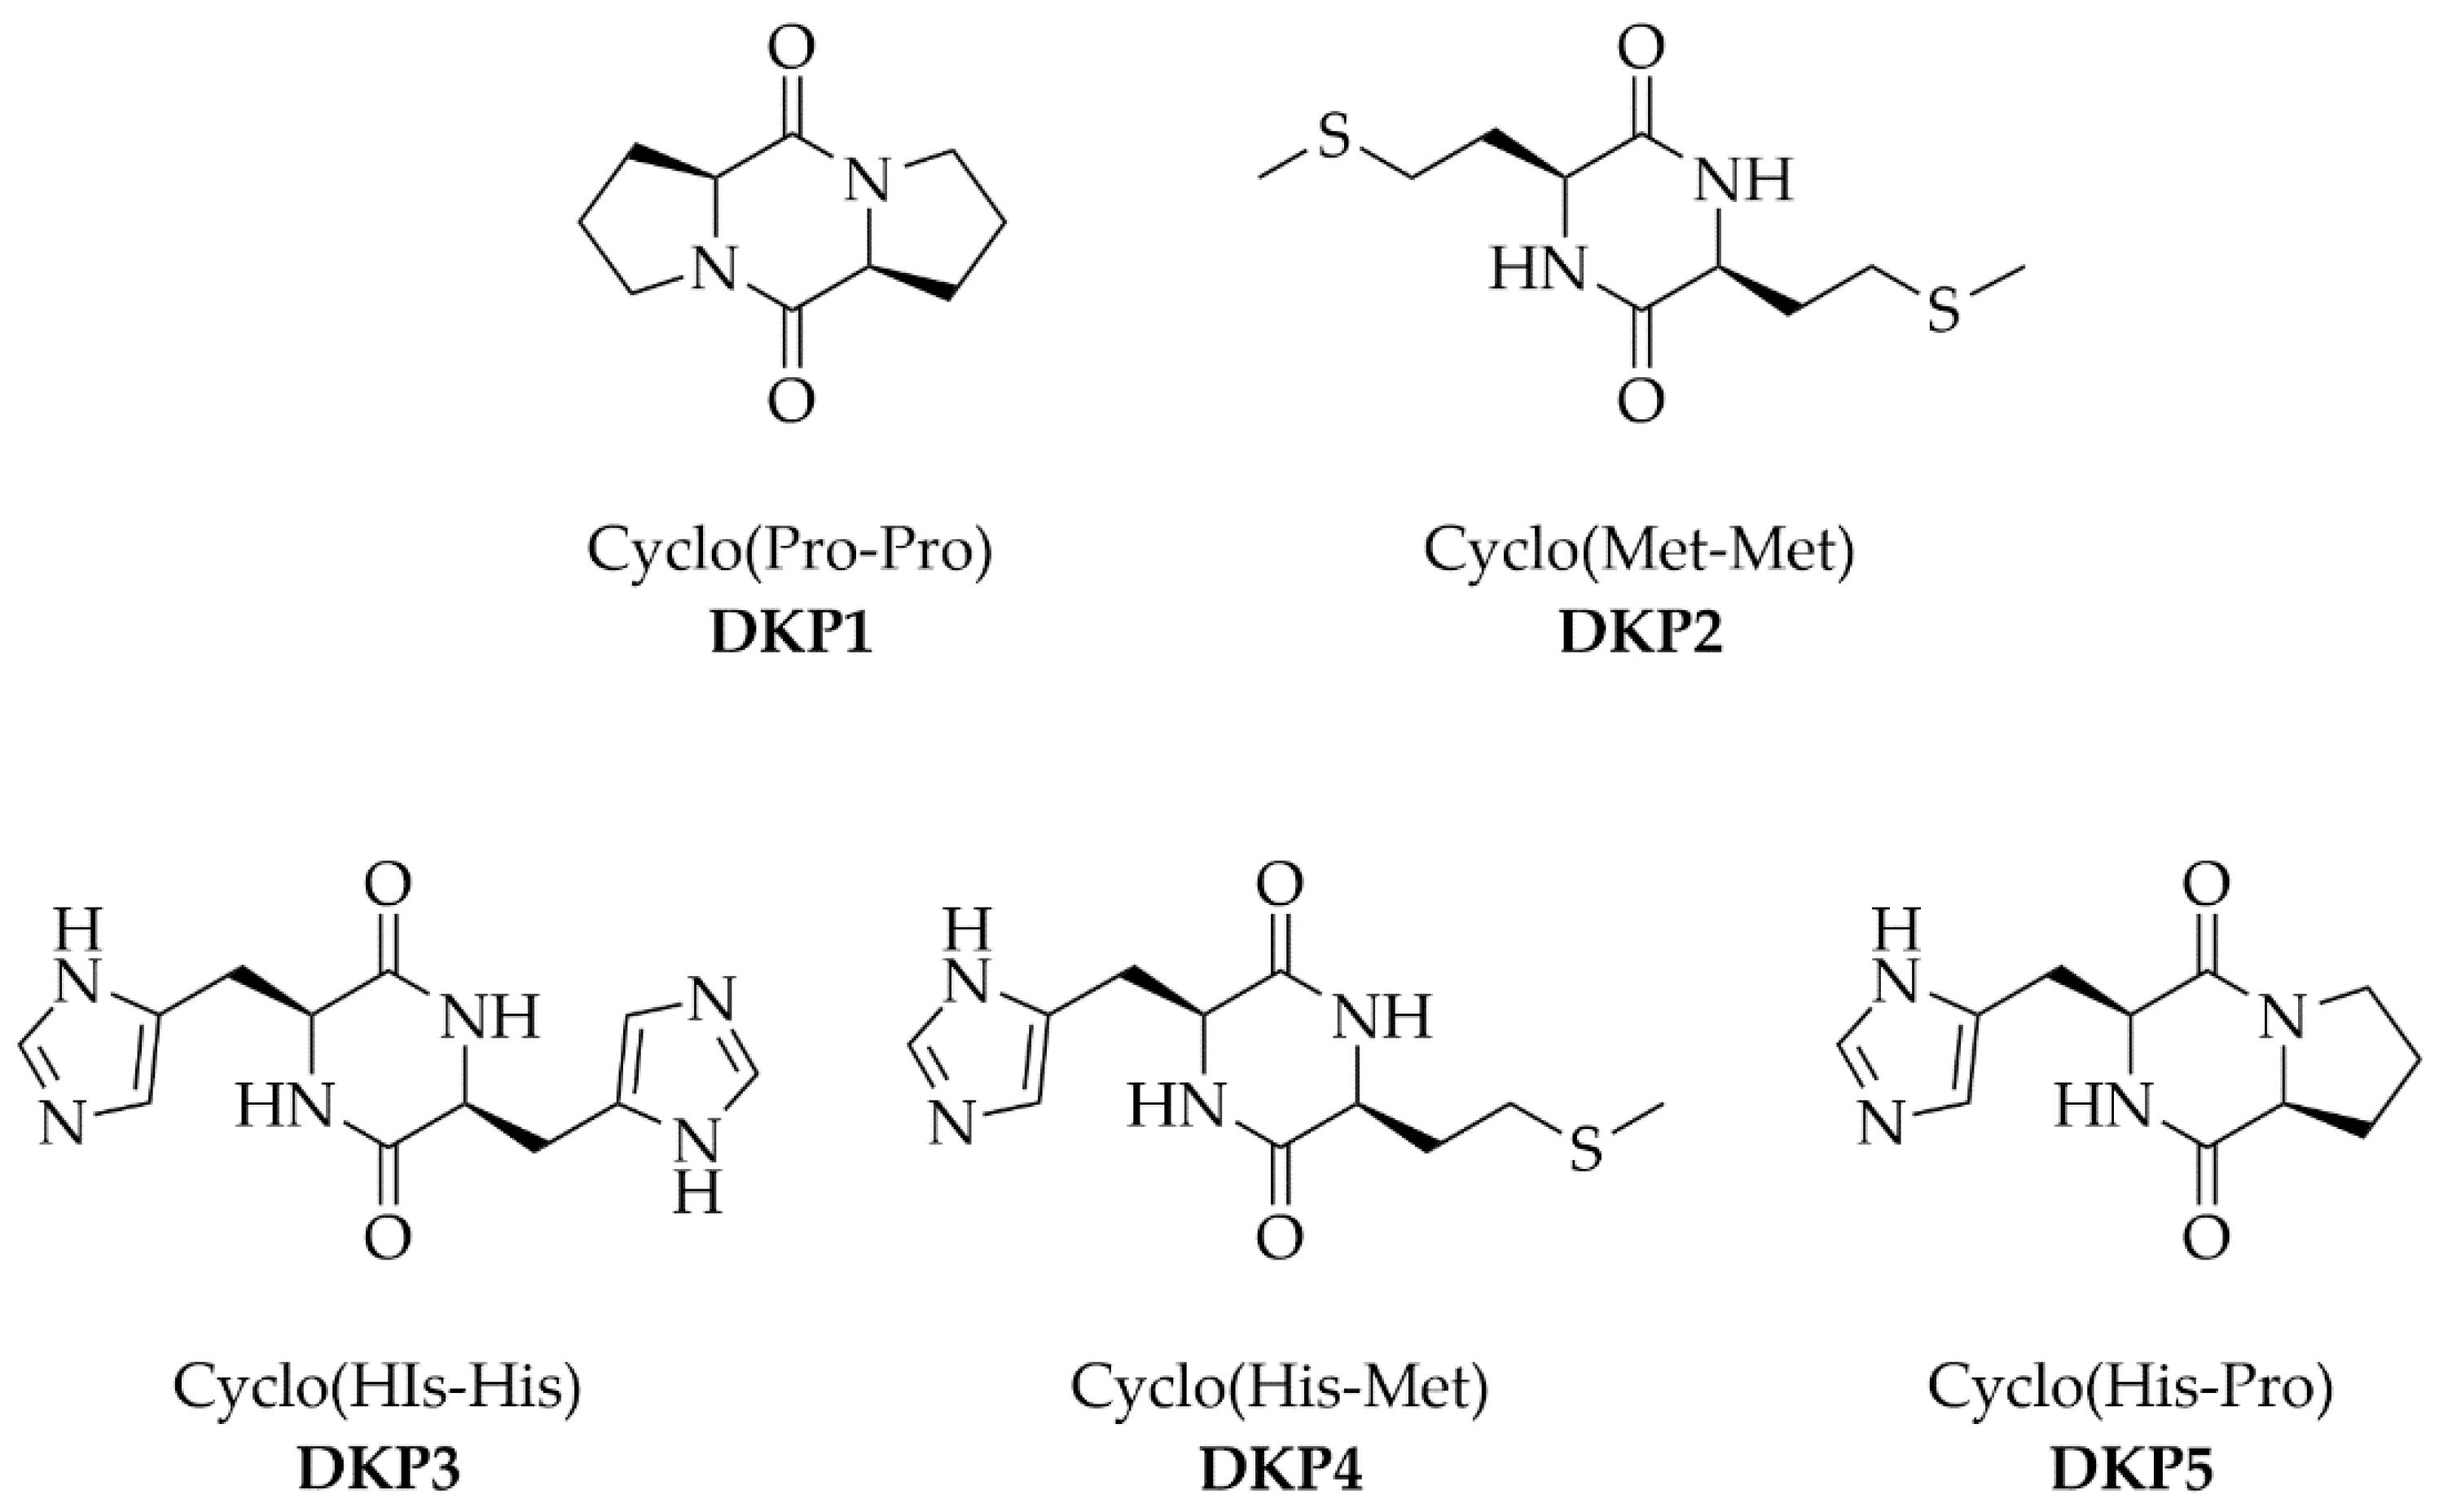 Cyclodipeptides: From Their Green Synthesis to Anti-Age Activity